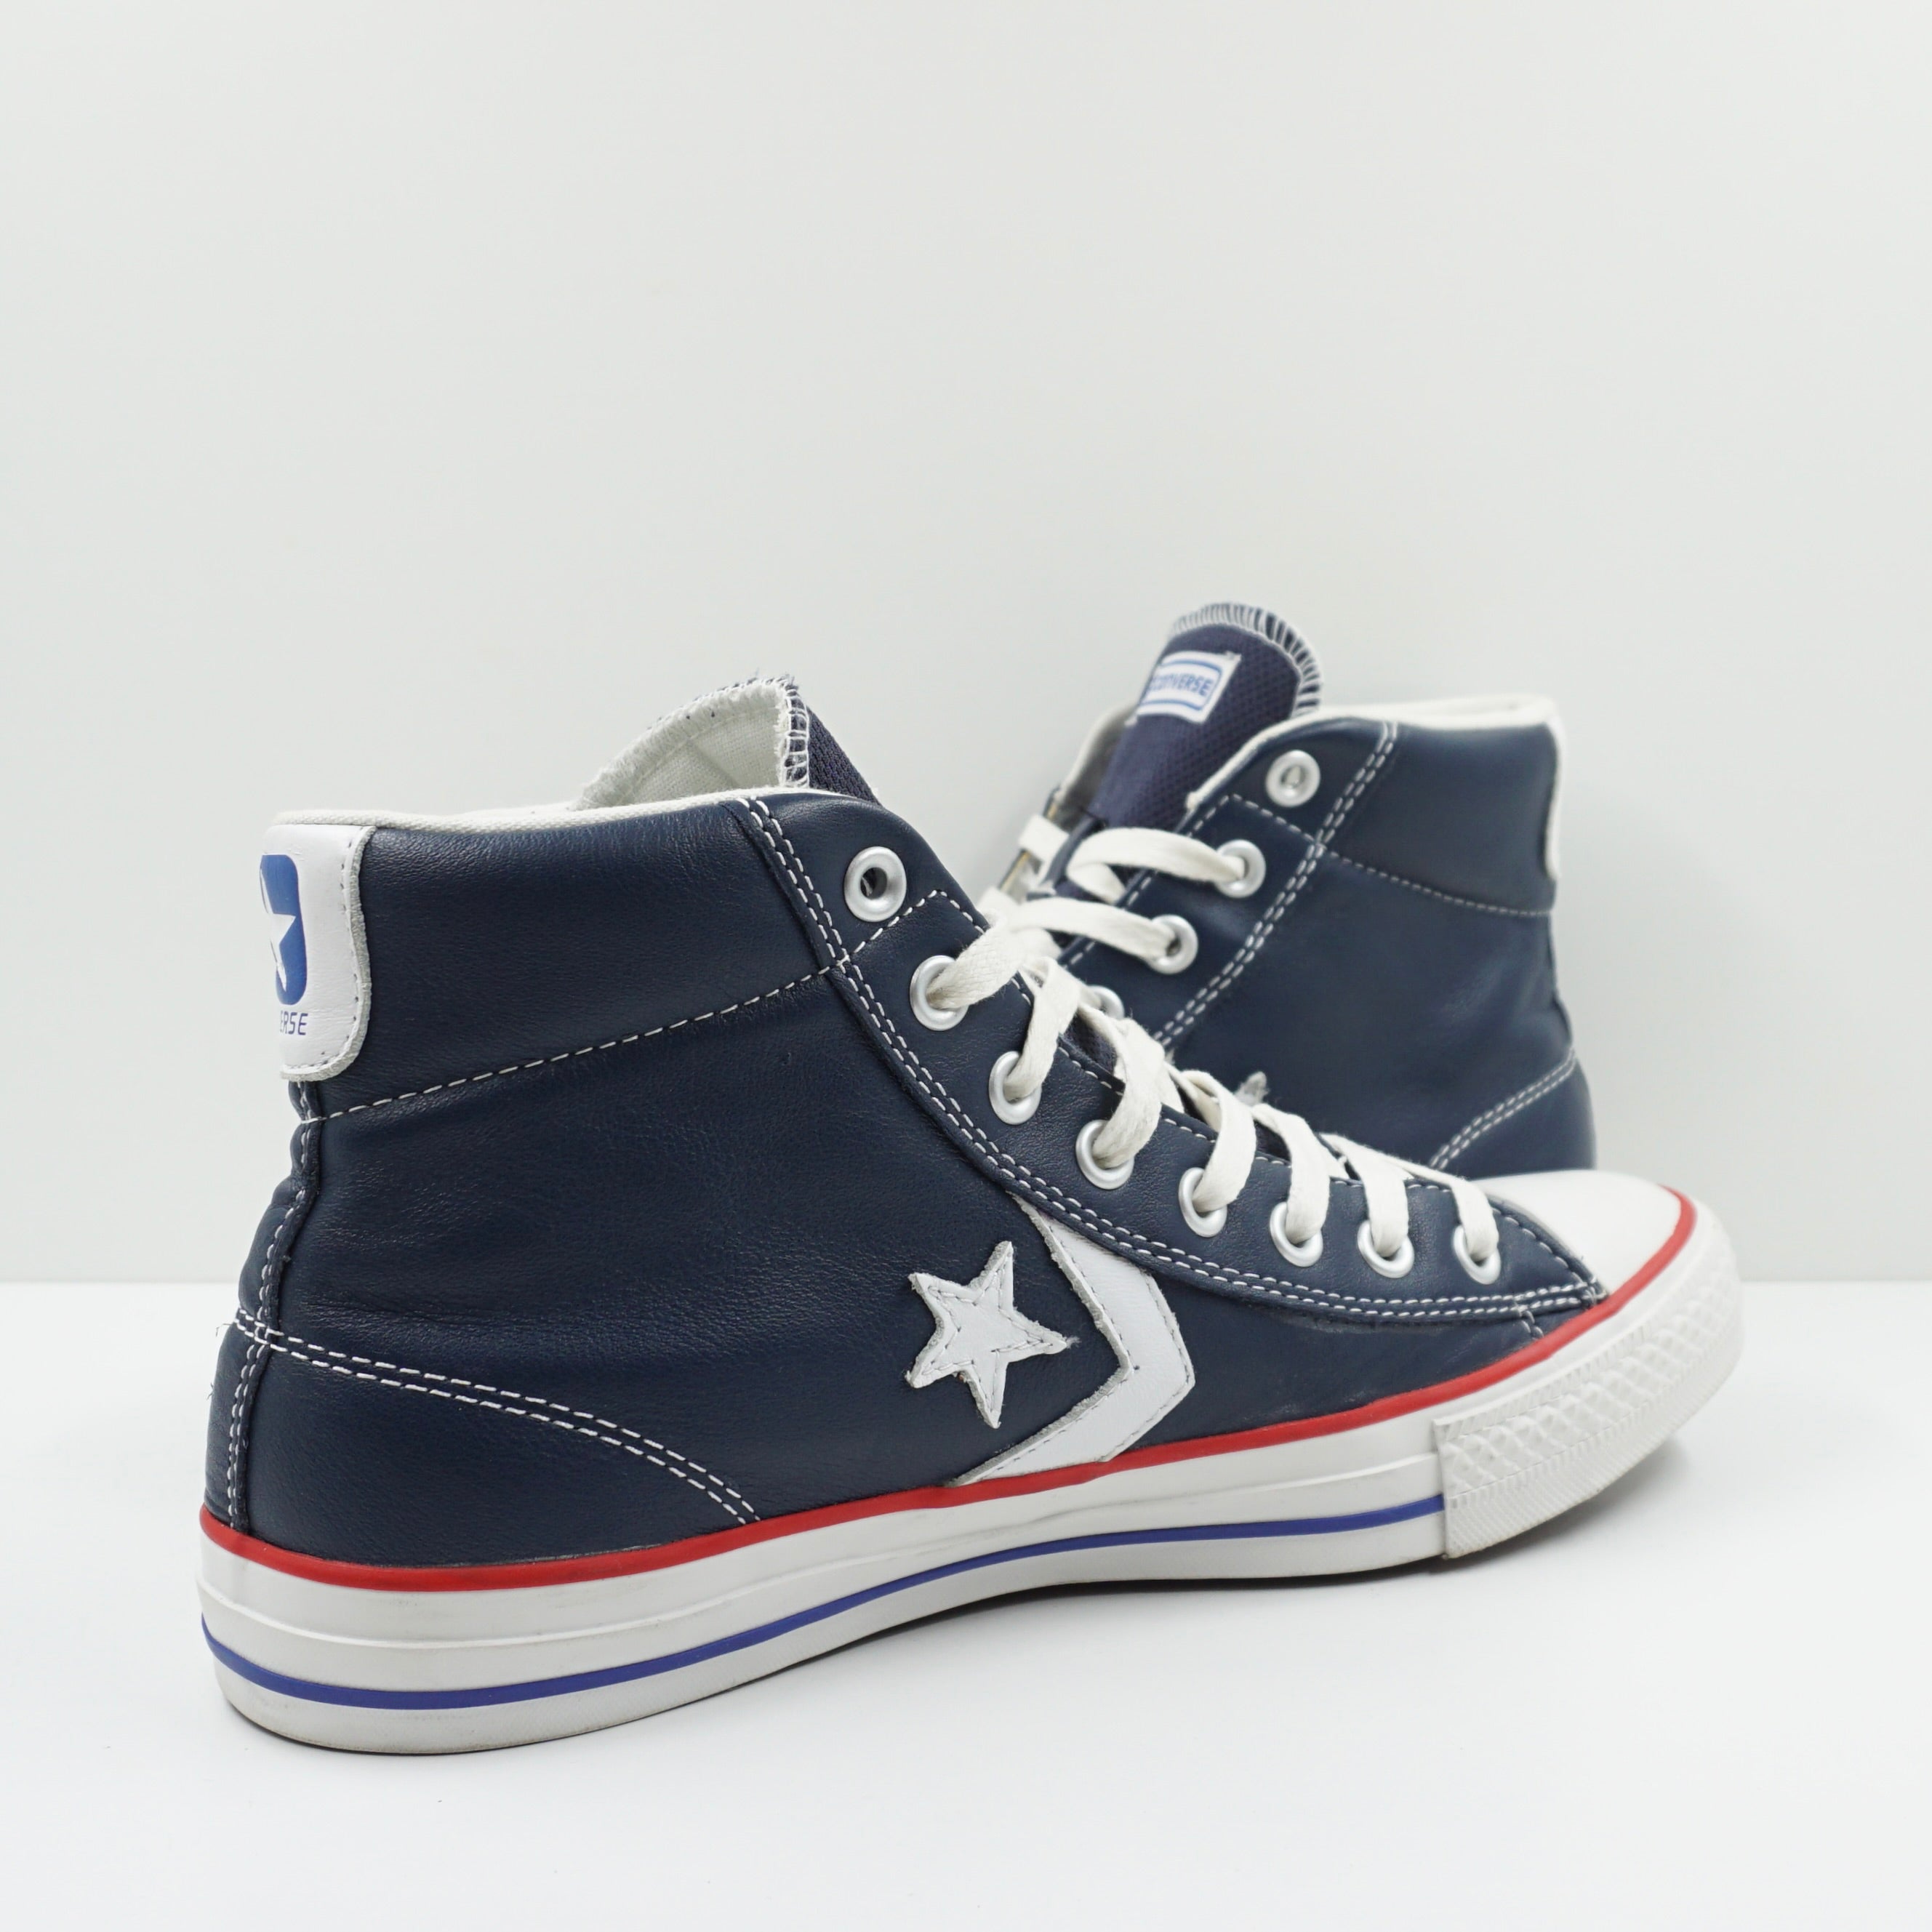 Converse Chuck Taylor All Star Leather Star Player High Navy